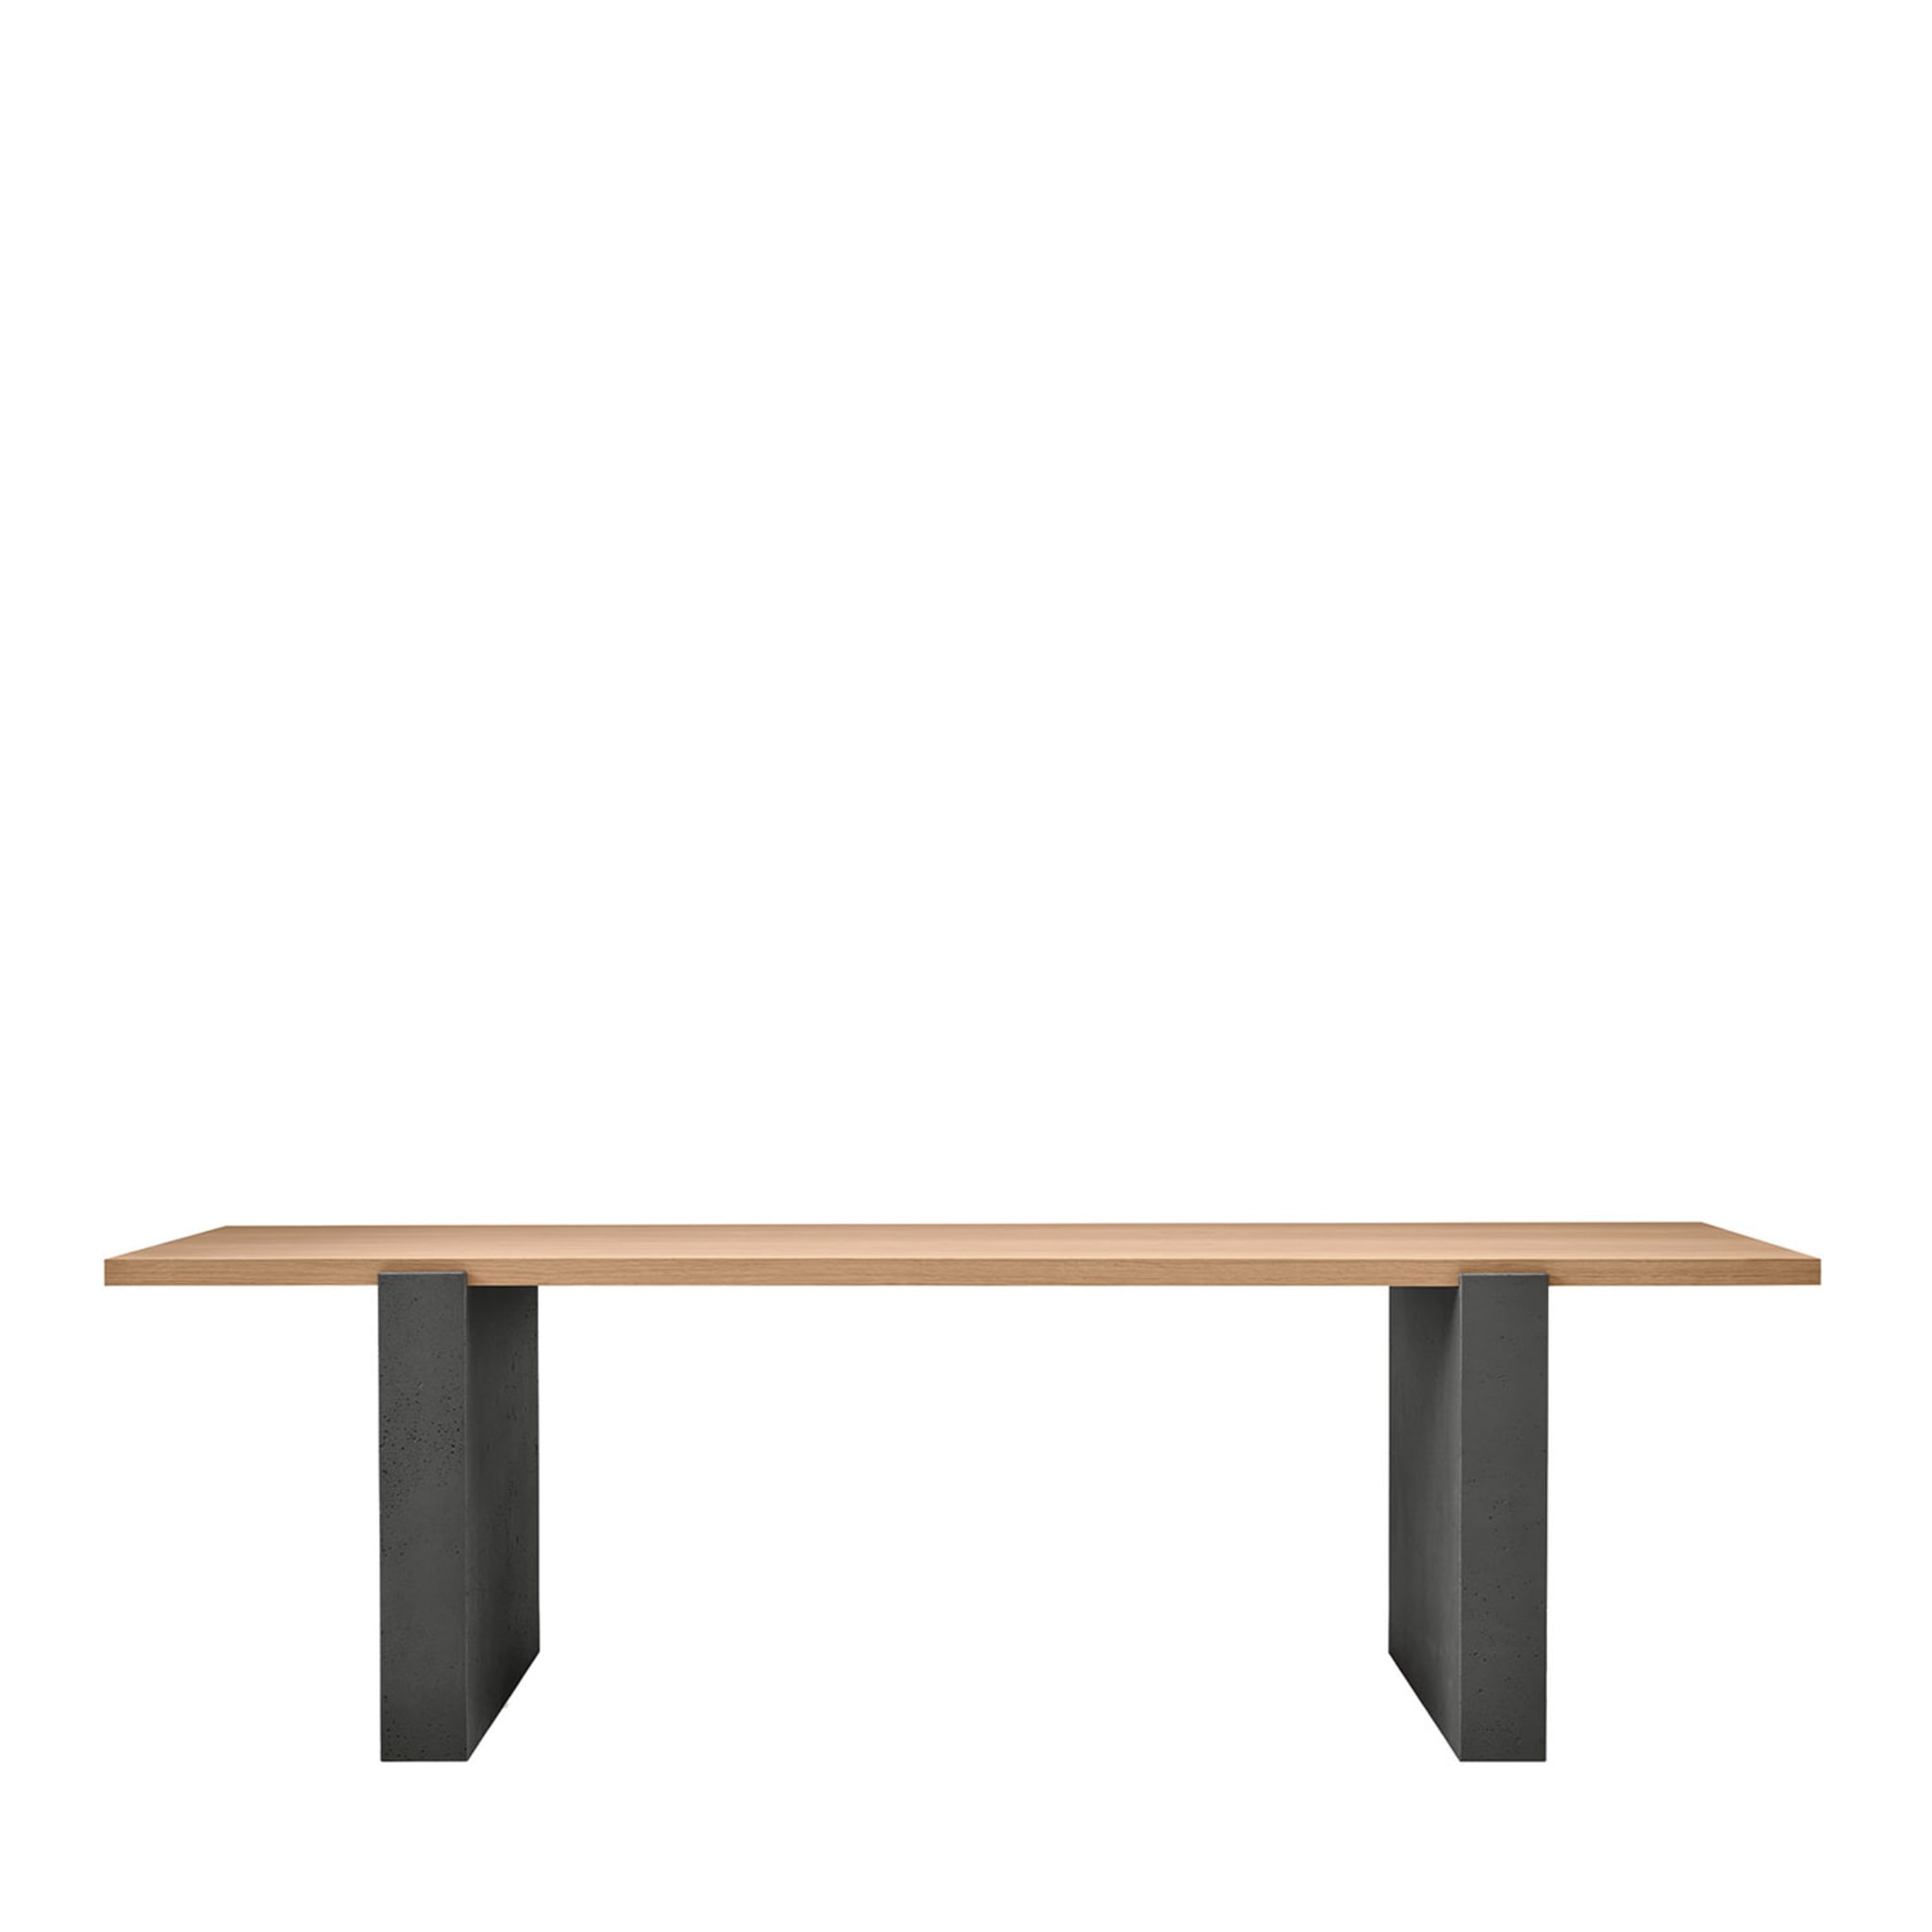 Accademia Table by Studio 63 - Main view